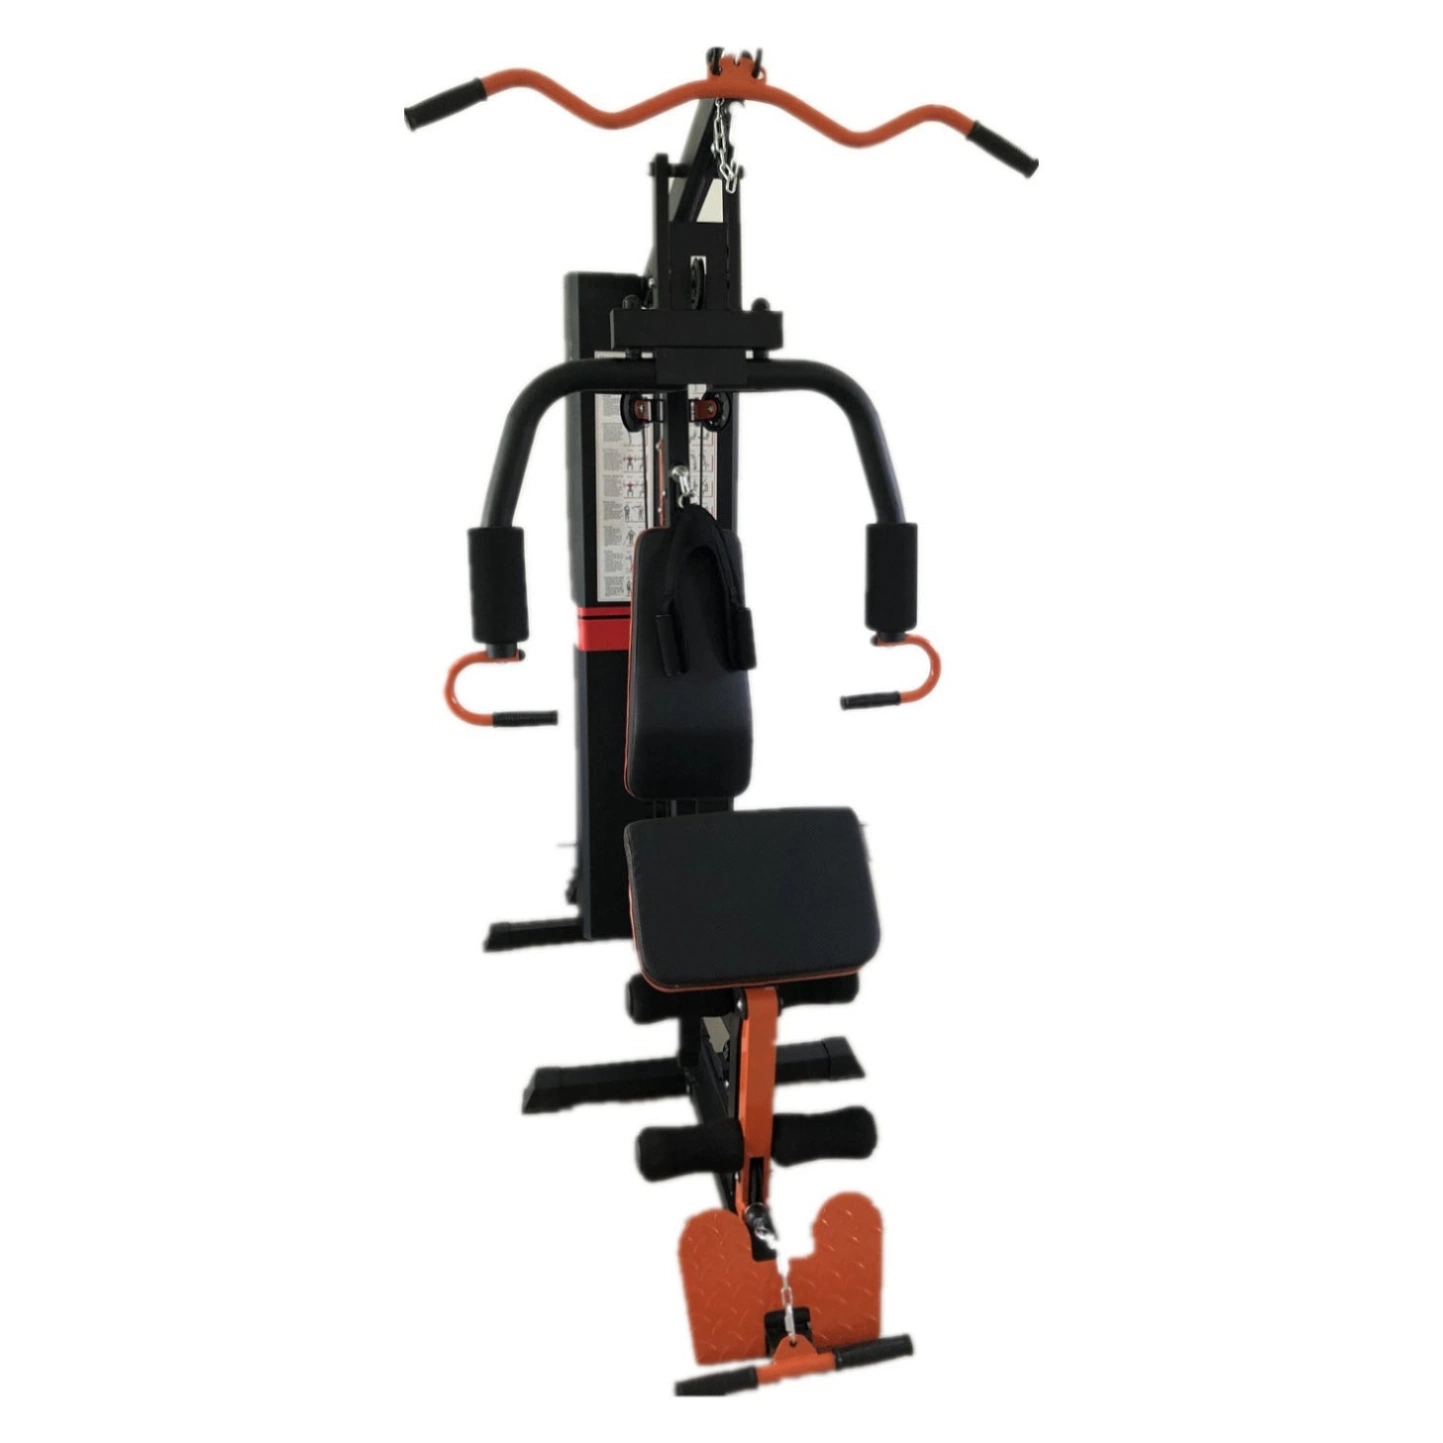 Mr-106 Cost-Effective High Performance Fitness Machine Strength Equipment Home Gym